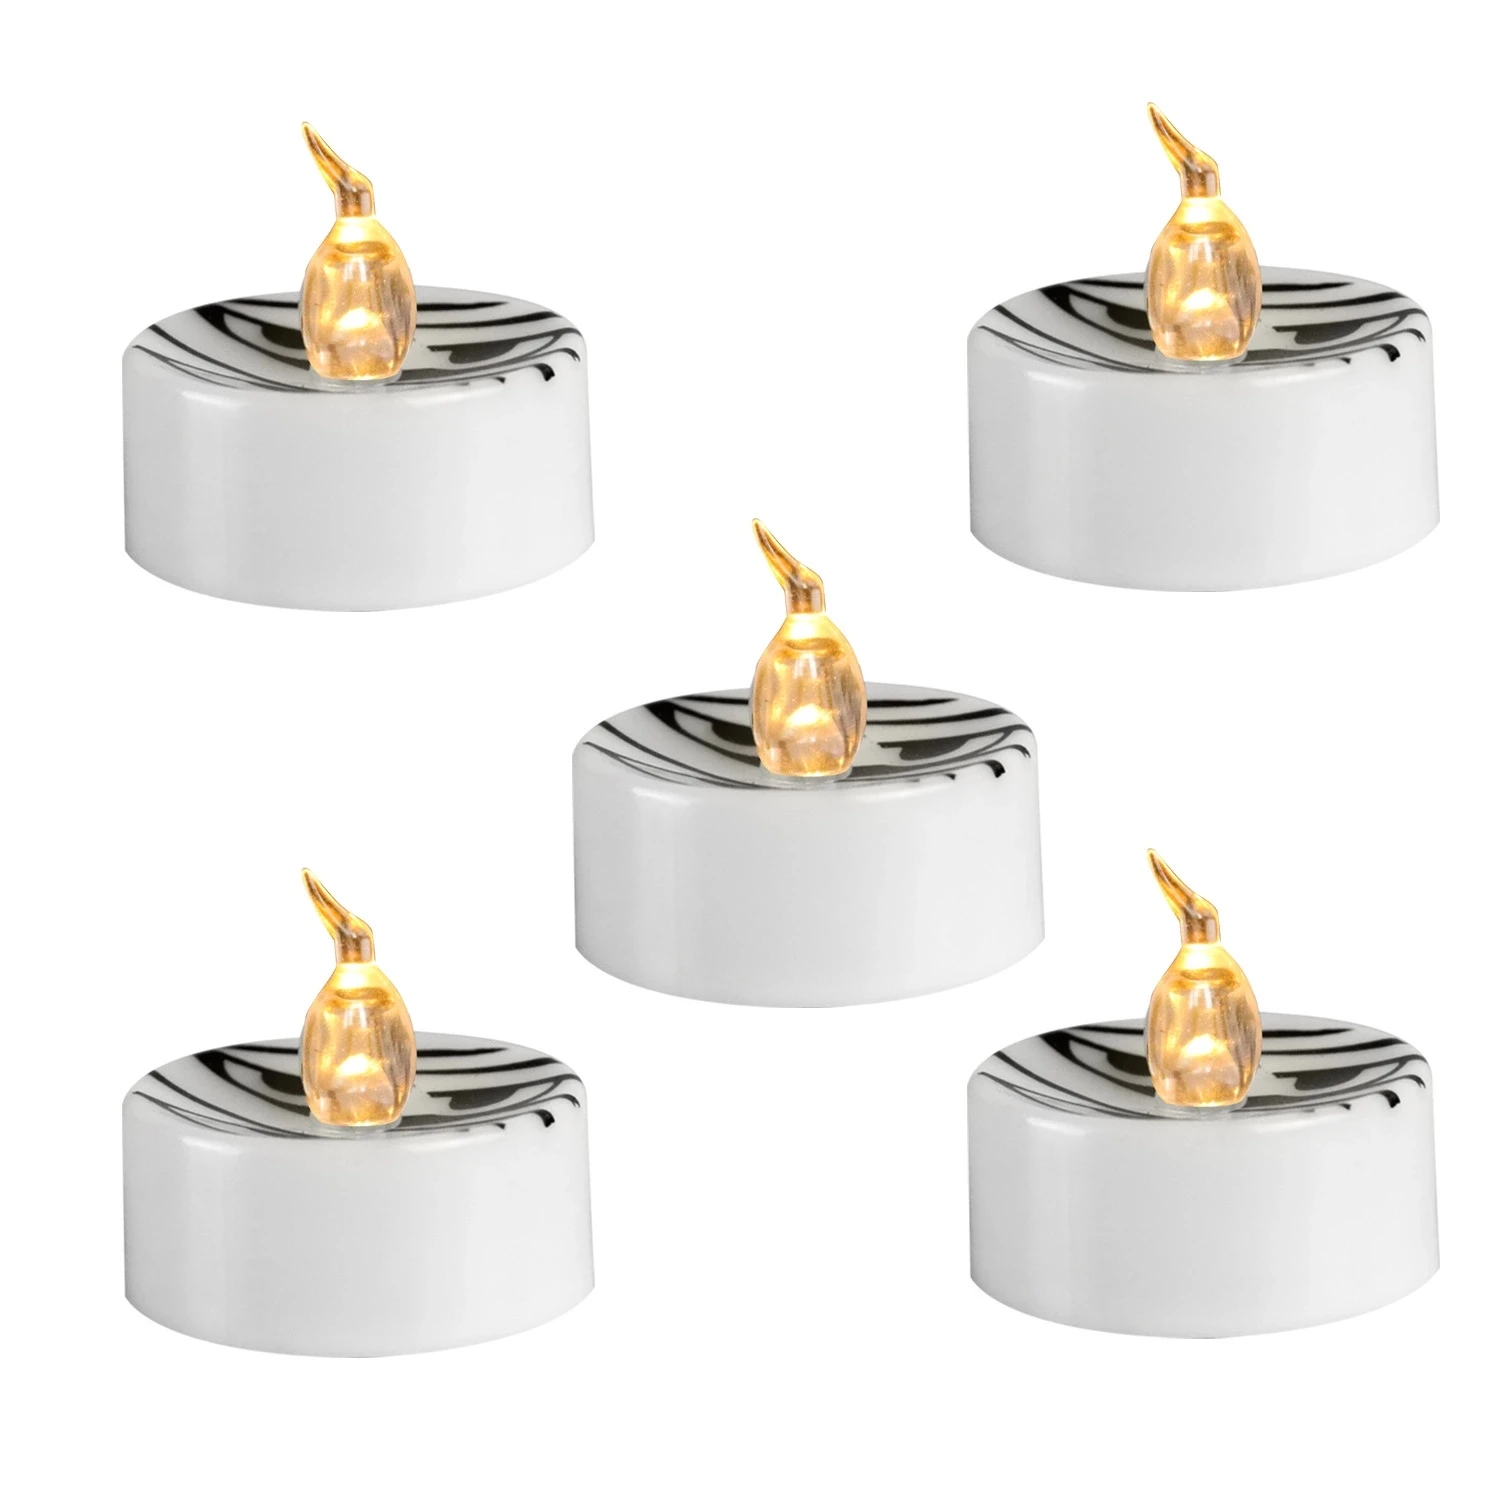 Halloween Decoration Black and White Stripes Battery Operated Flameless LED Tea Light Candle